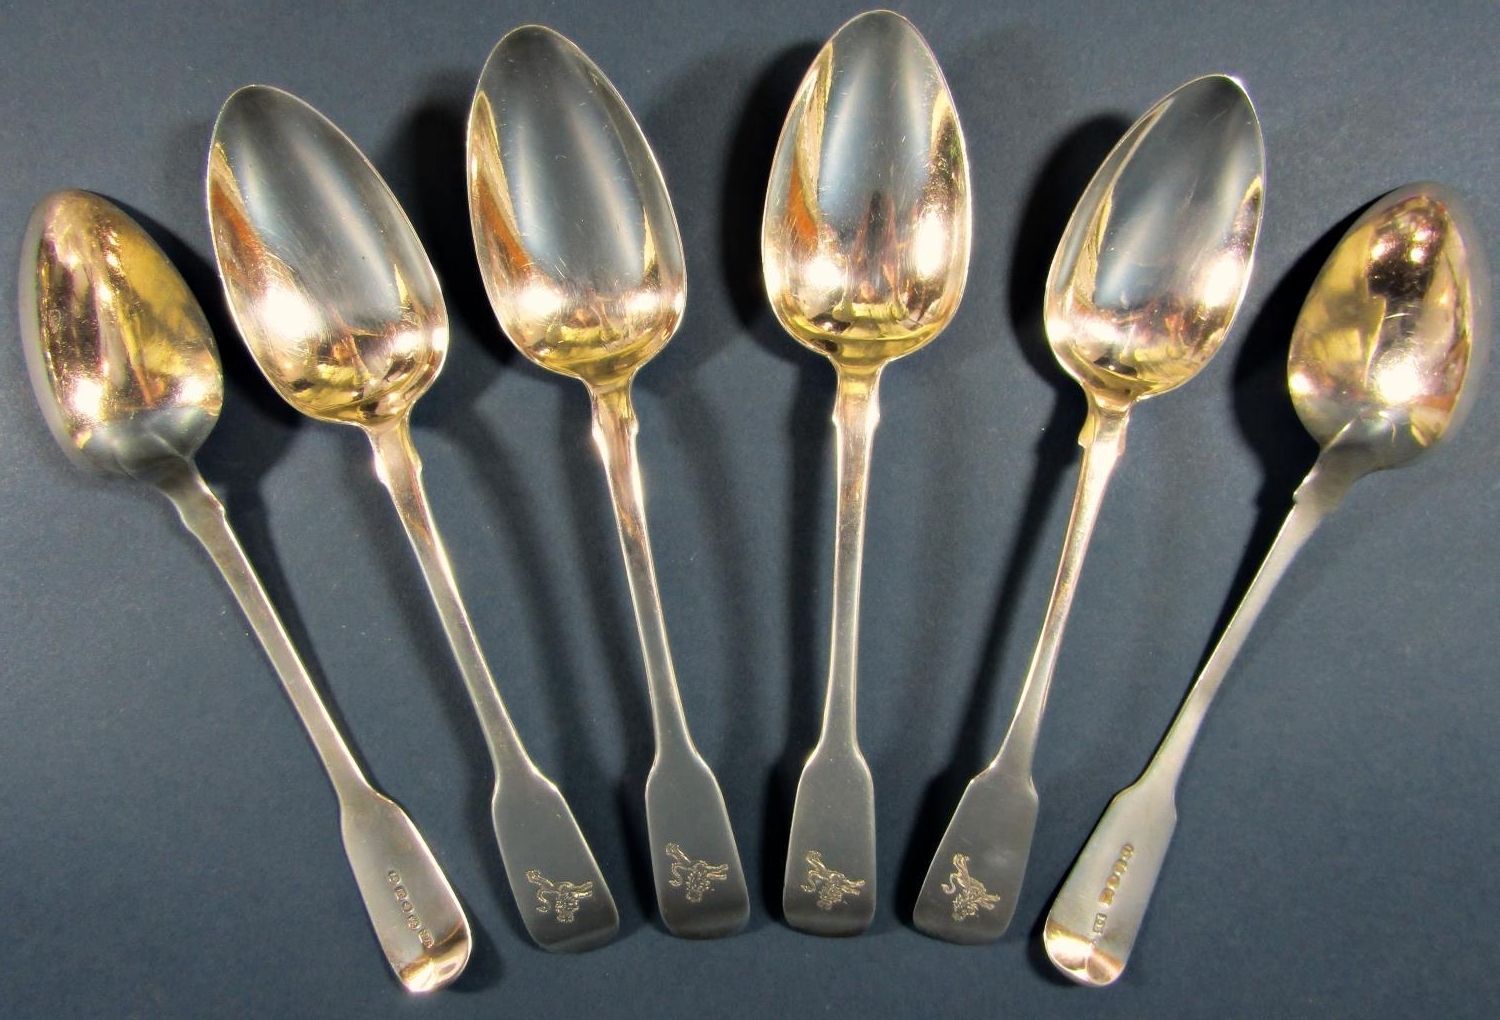 Four Georgian silver serving spoons, London 1825, maker James Beebe, together with two Georgian